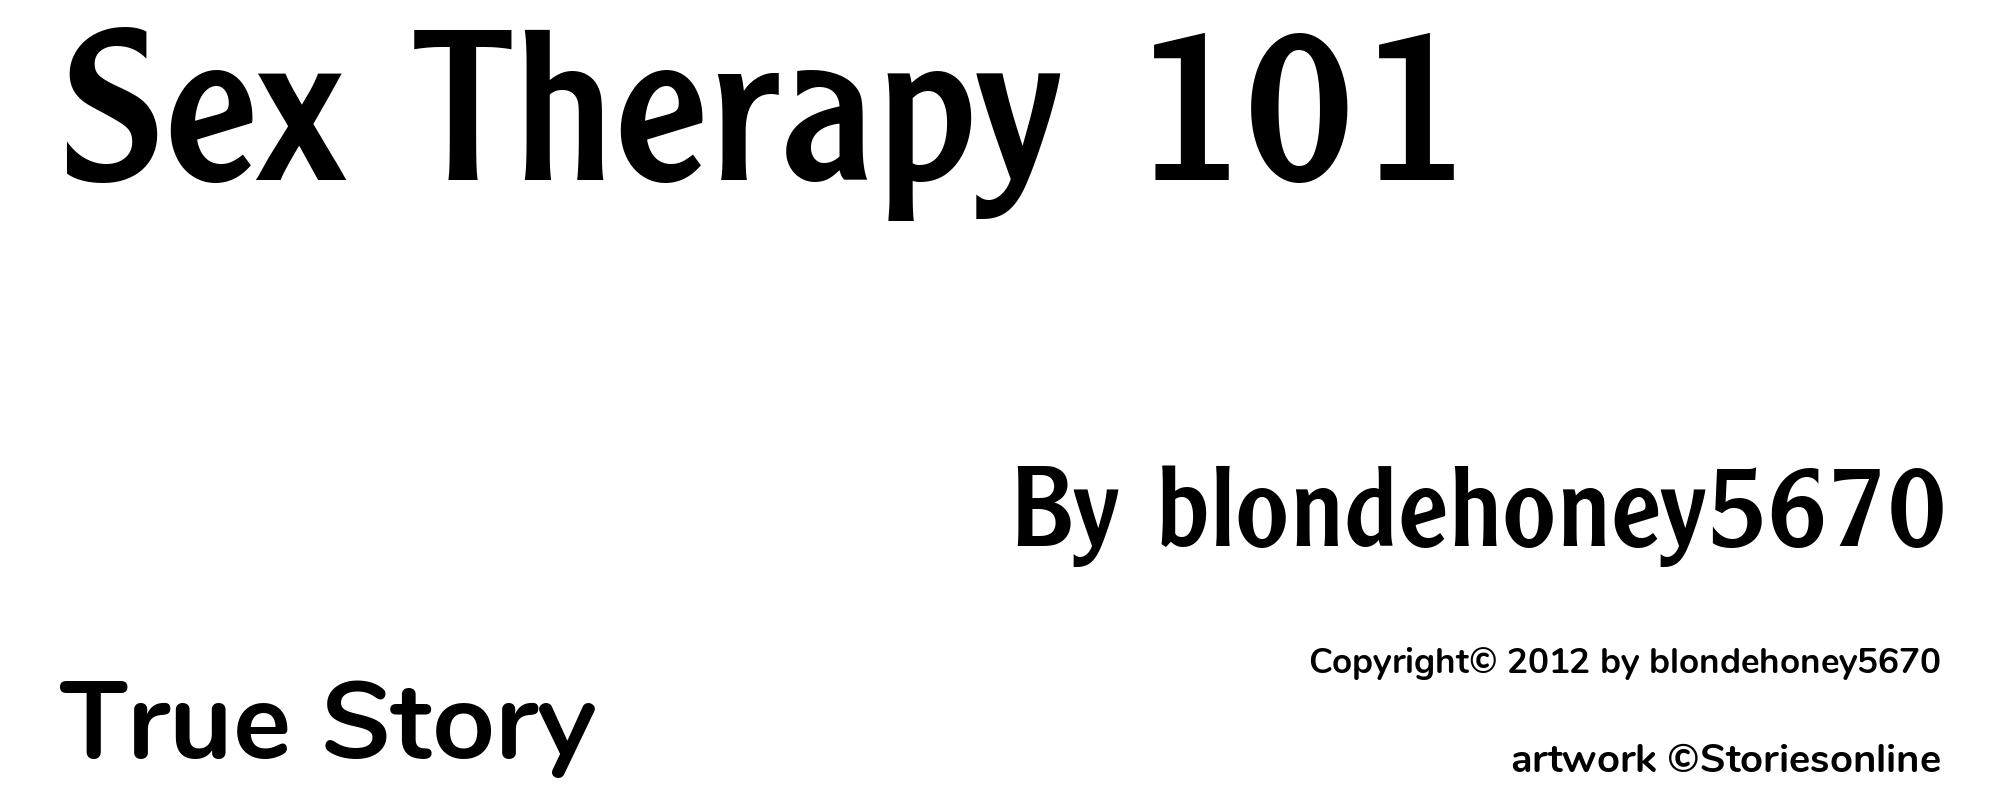 Sex Therapy 101 - Cover